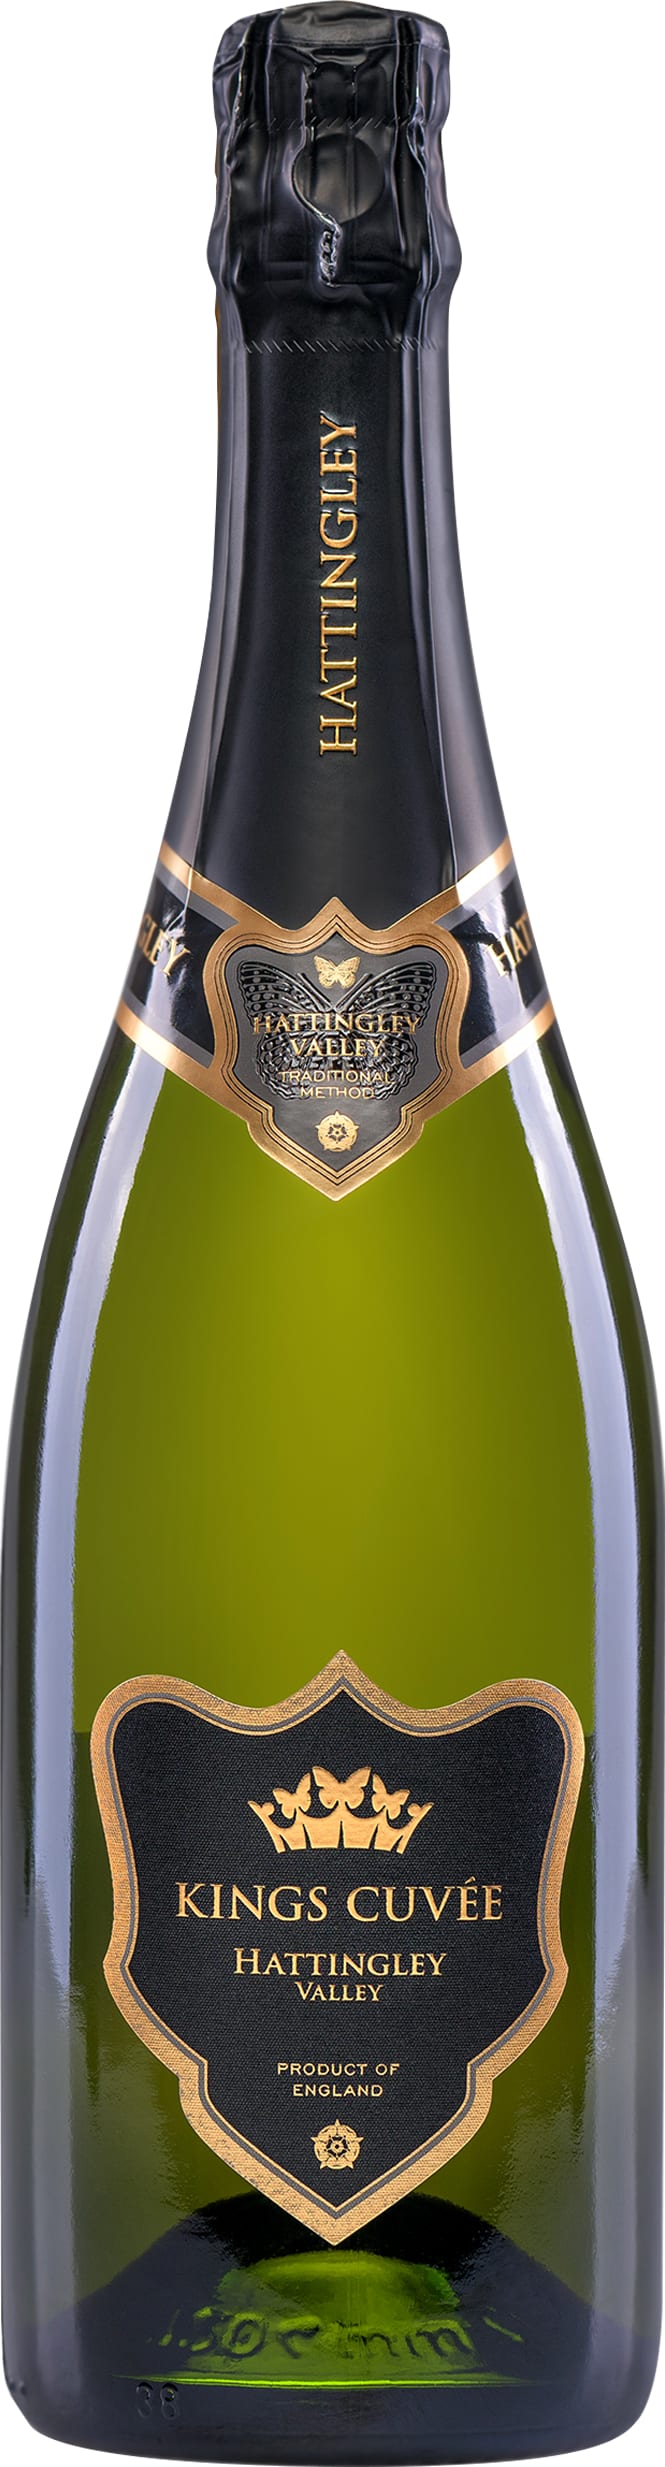 Hattingley Valley Kings Cuvee 2015 75cl - Buy Hattingley Valley Wines from GREAT WINES DIRECT wine shop